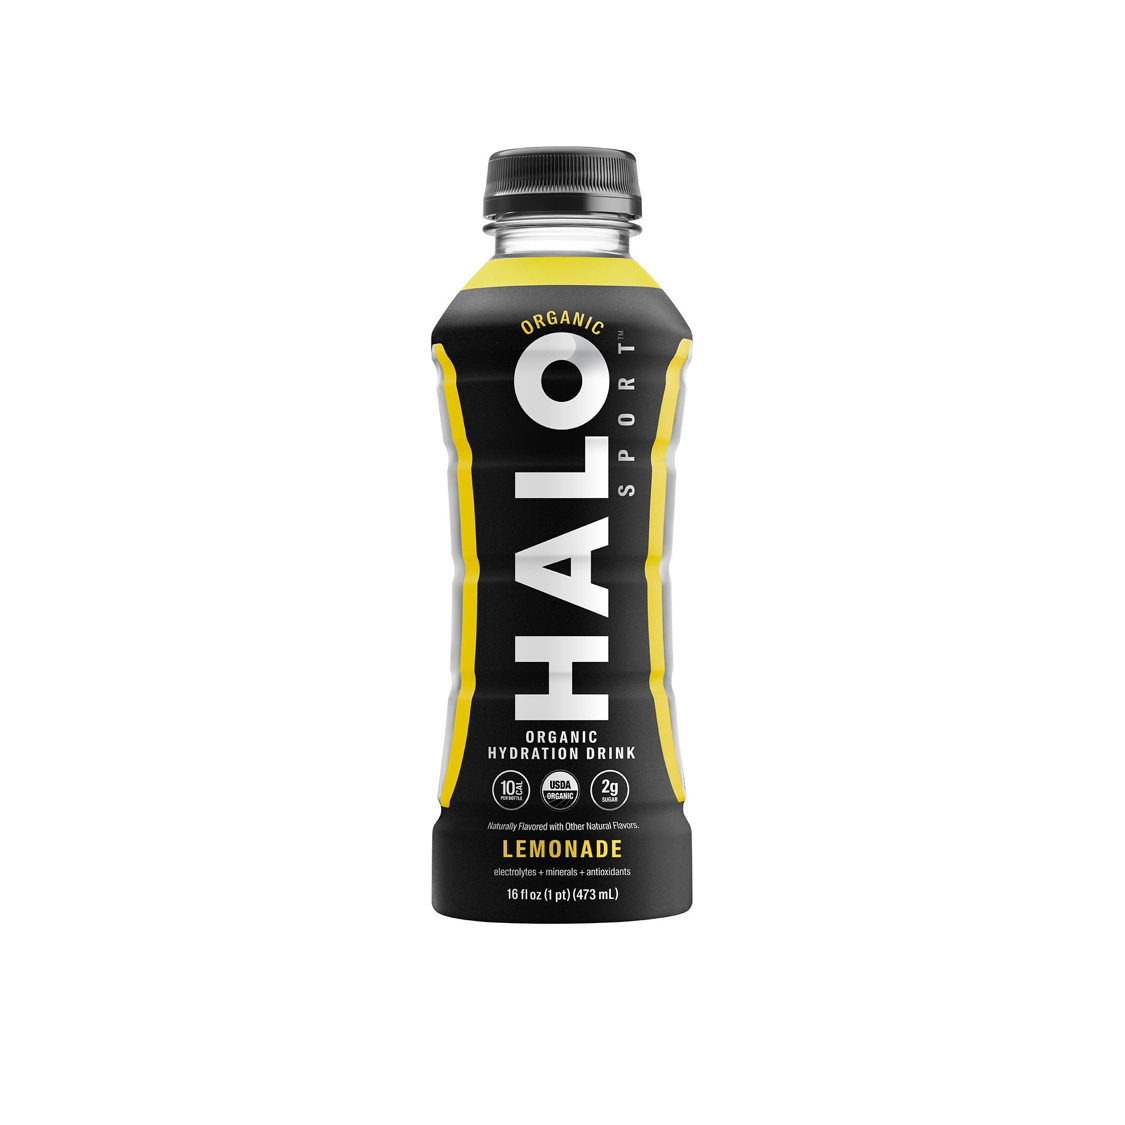 Halo Sport, $39.99 (Pack of 12)